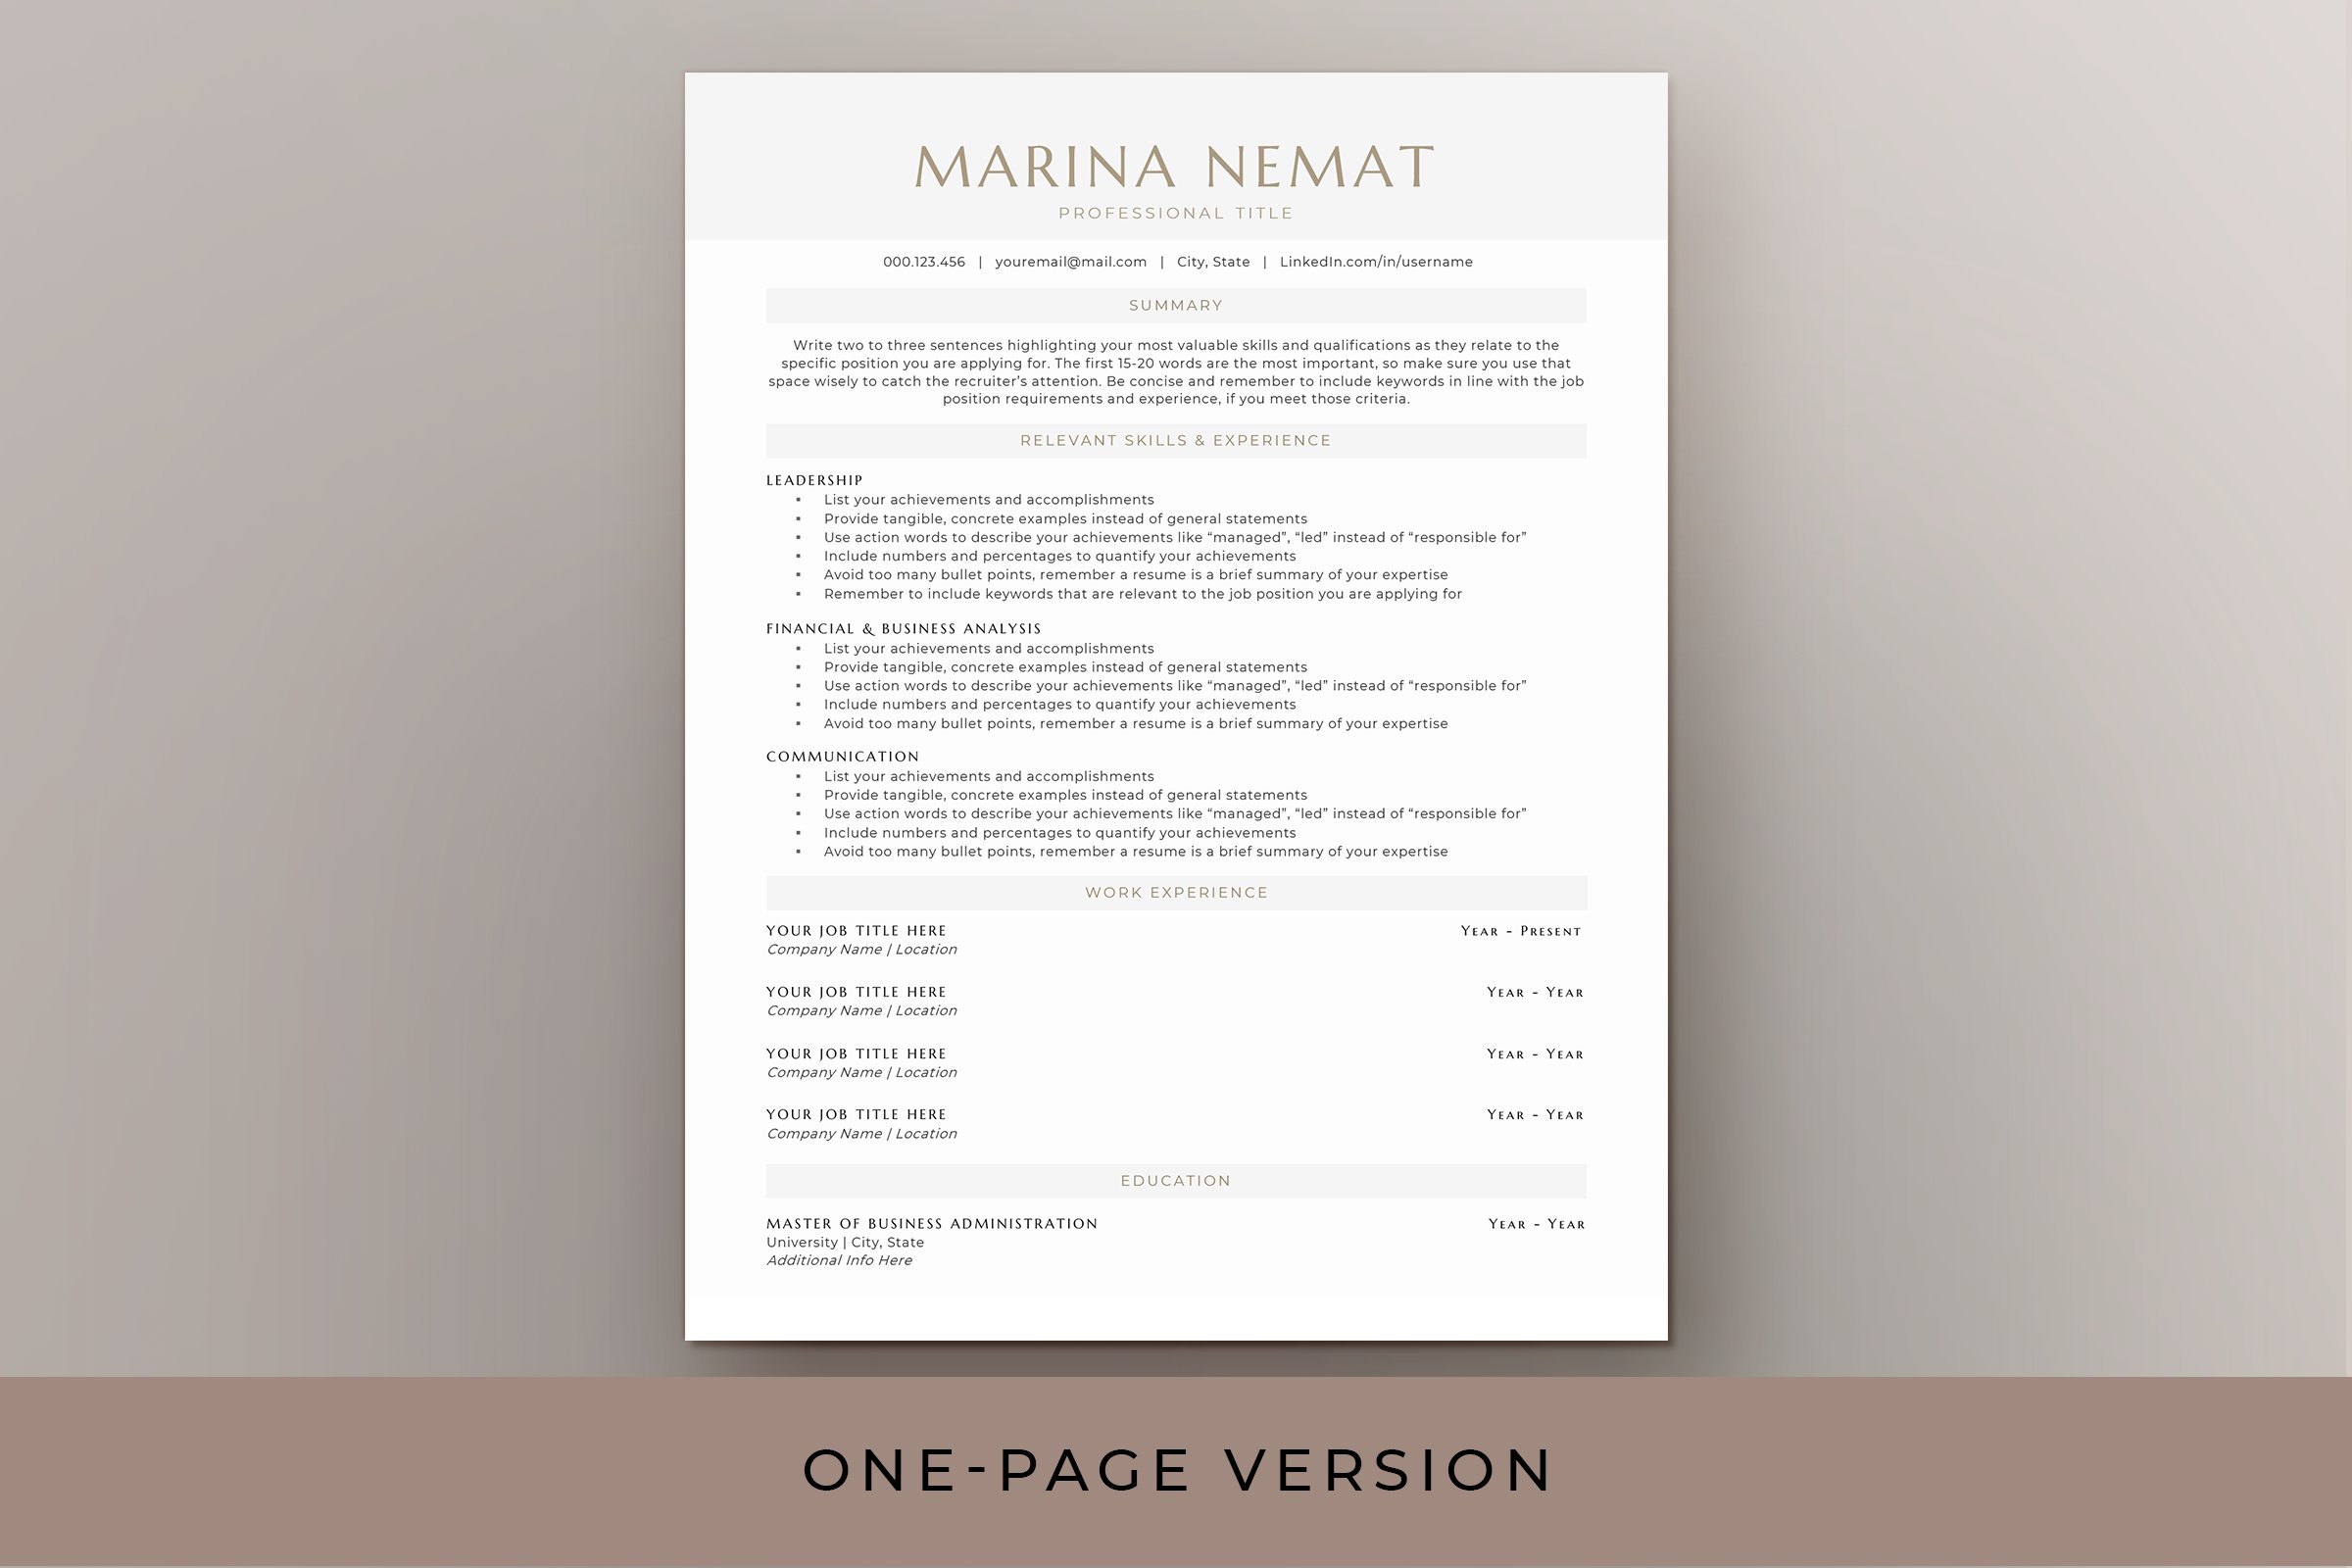 Professional resume template with a simple cover letter.